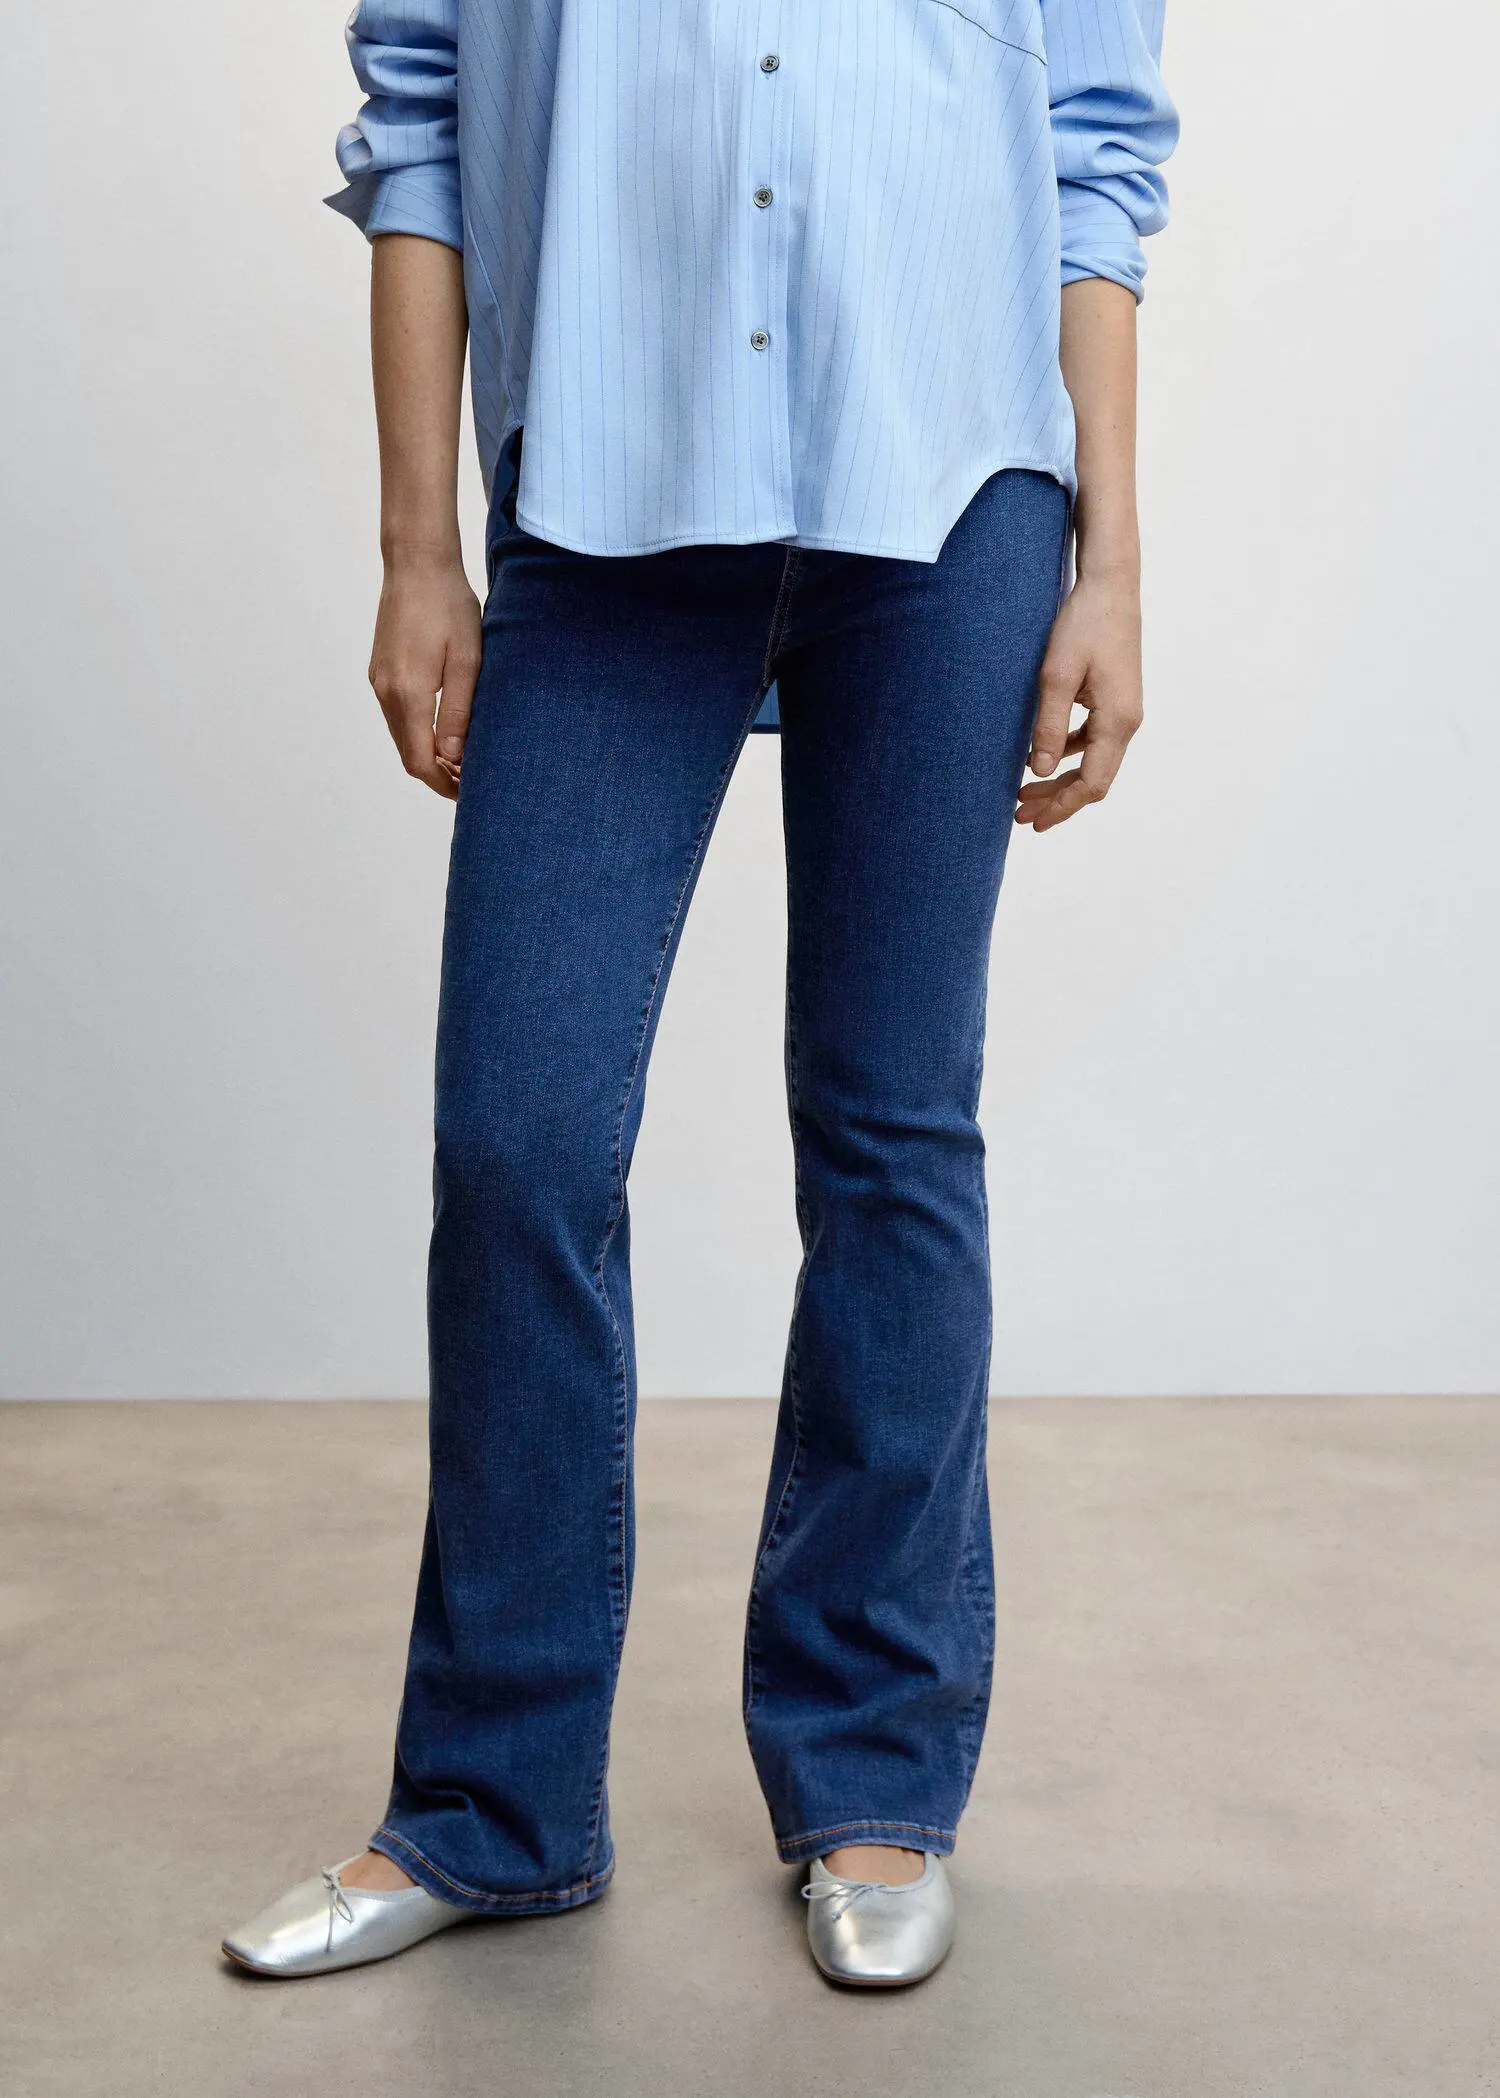 Mango Maternity flared jeans. a woman standing in front of a white wall. 